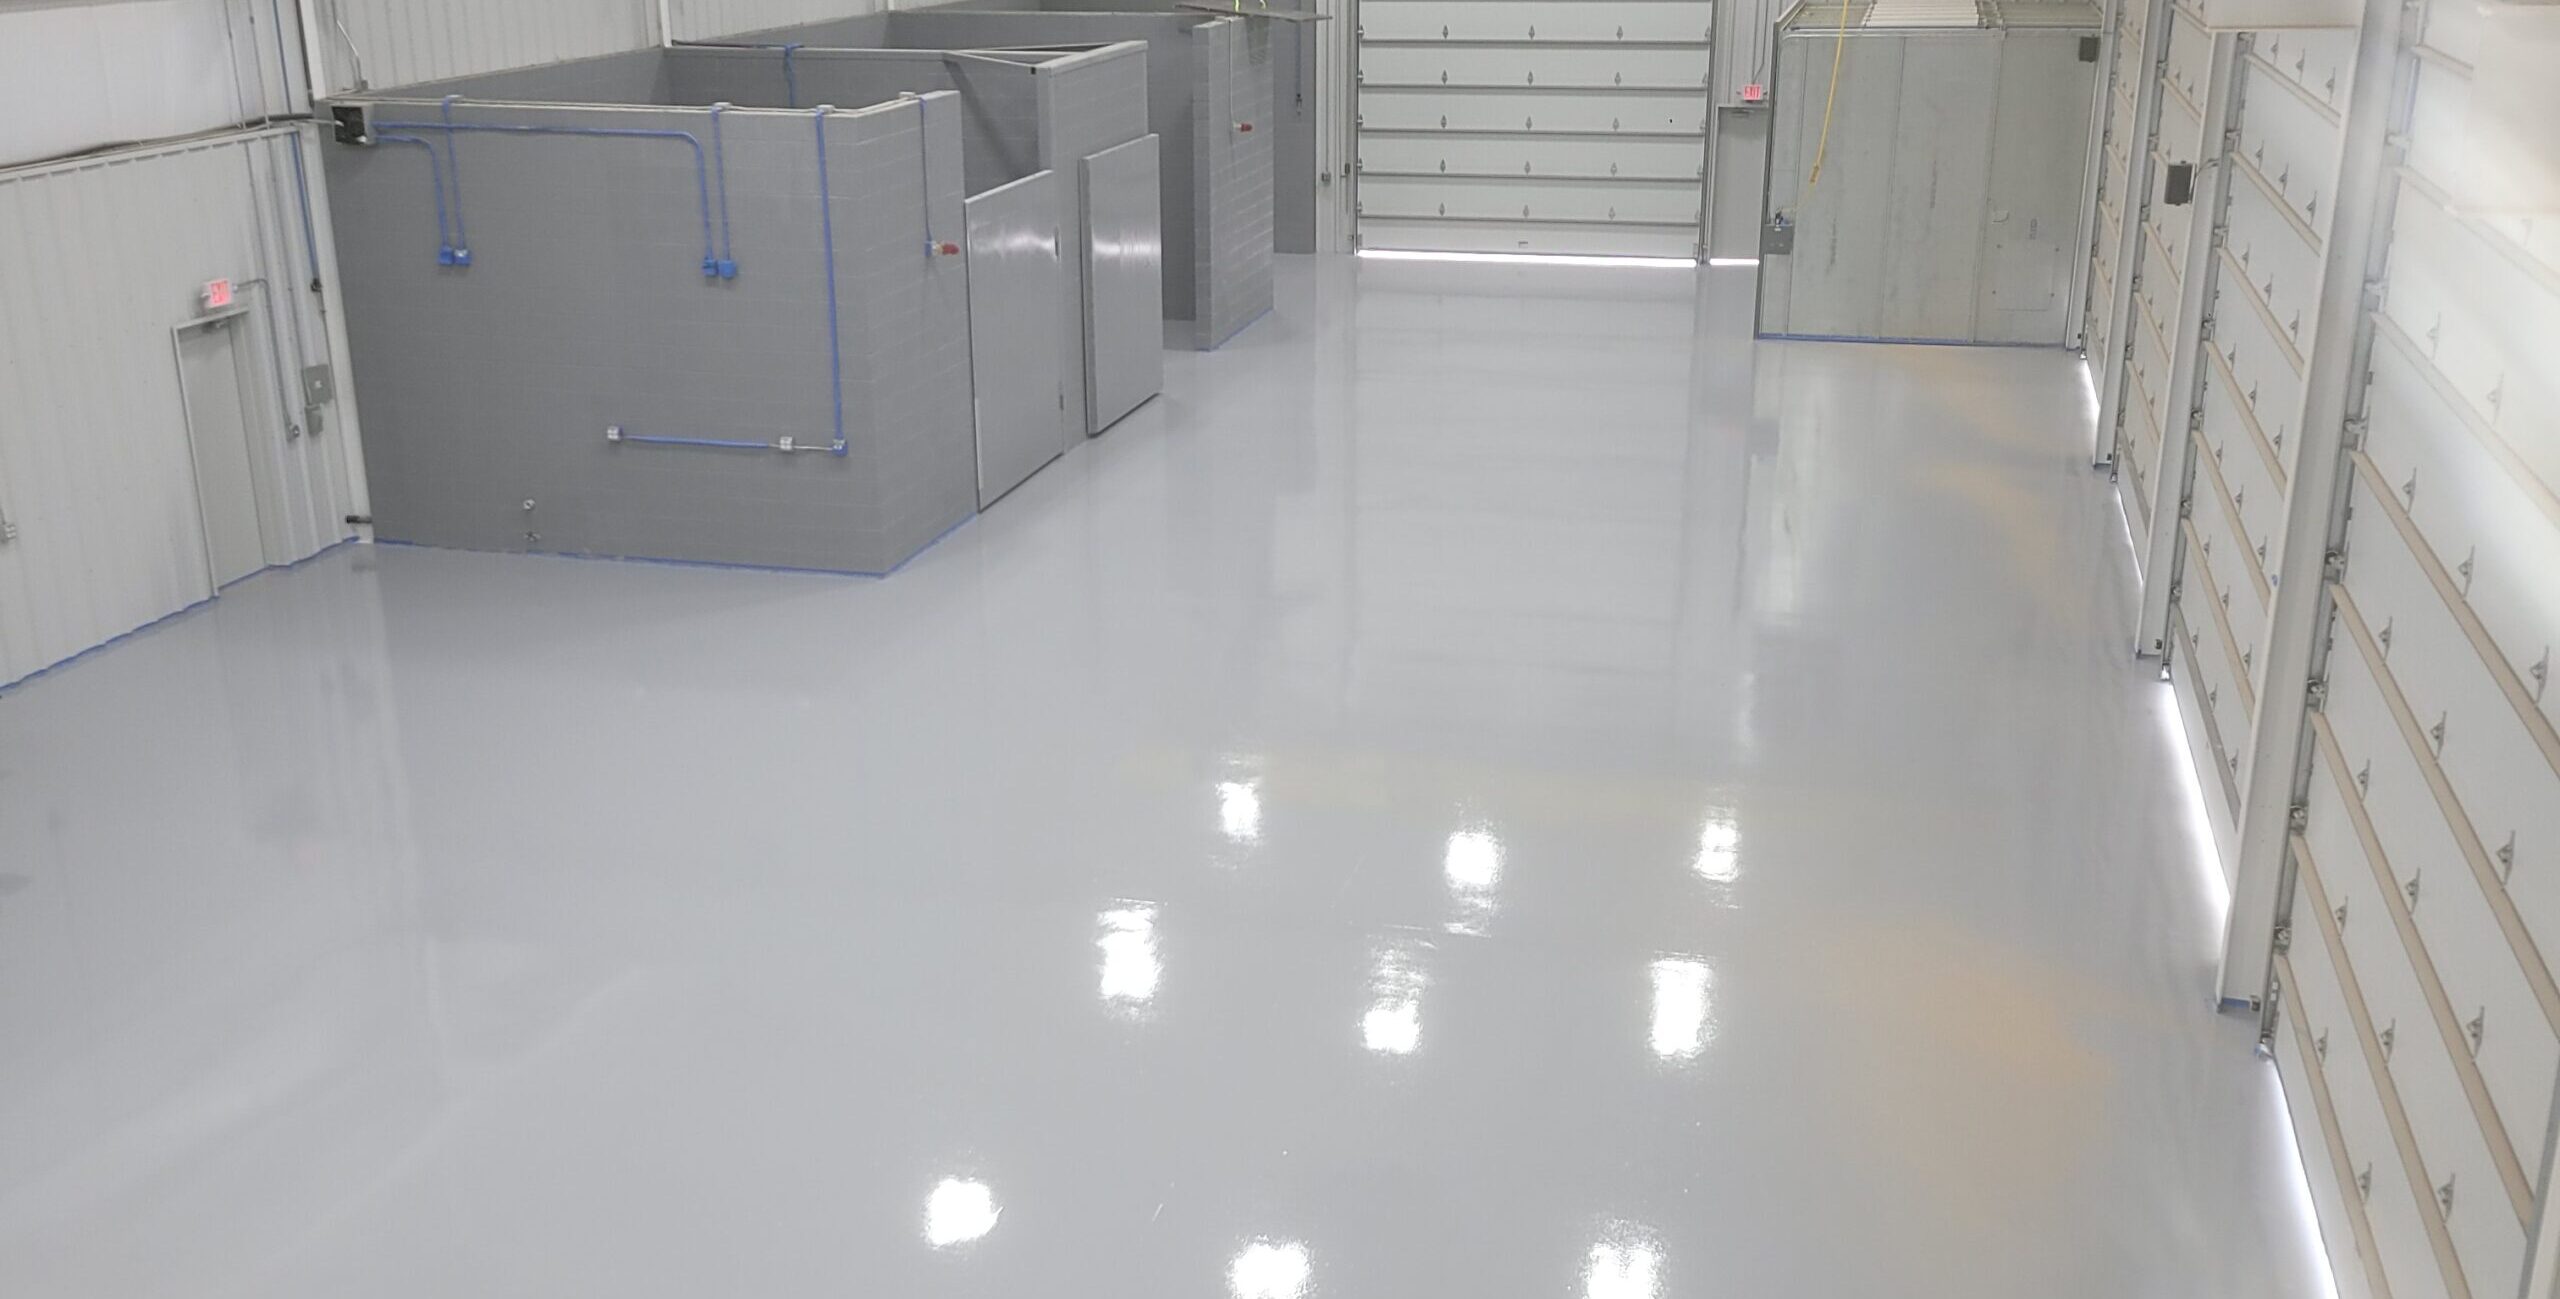 Say Goodbye to Ugly Floors: With Commercial Floor Coatings